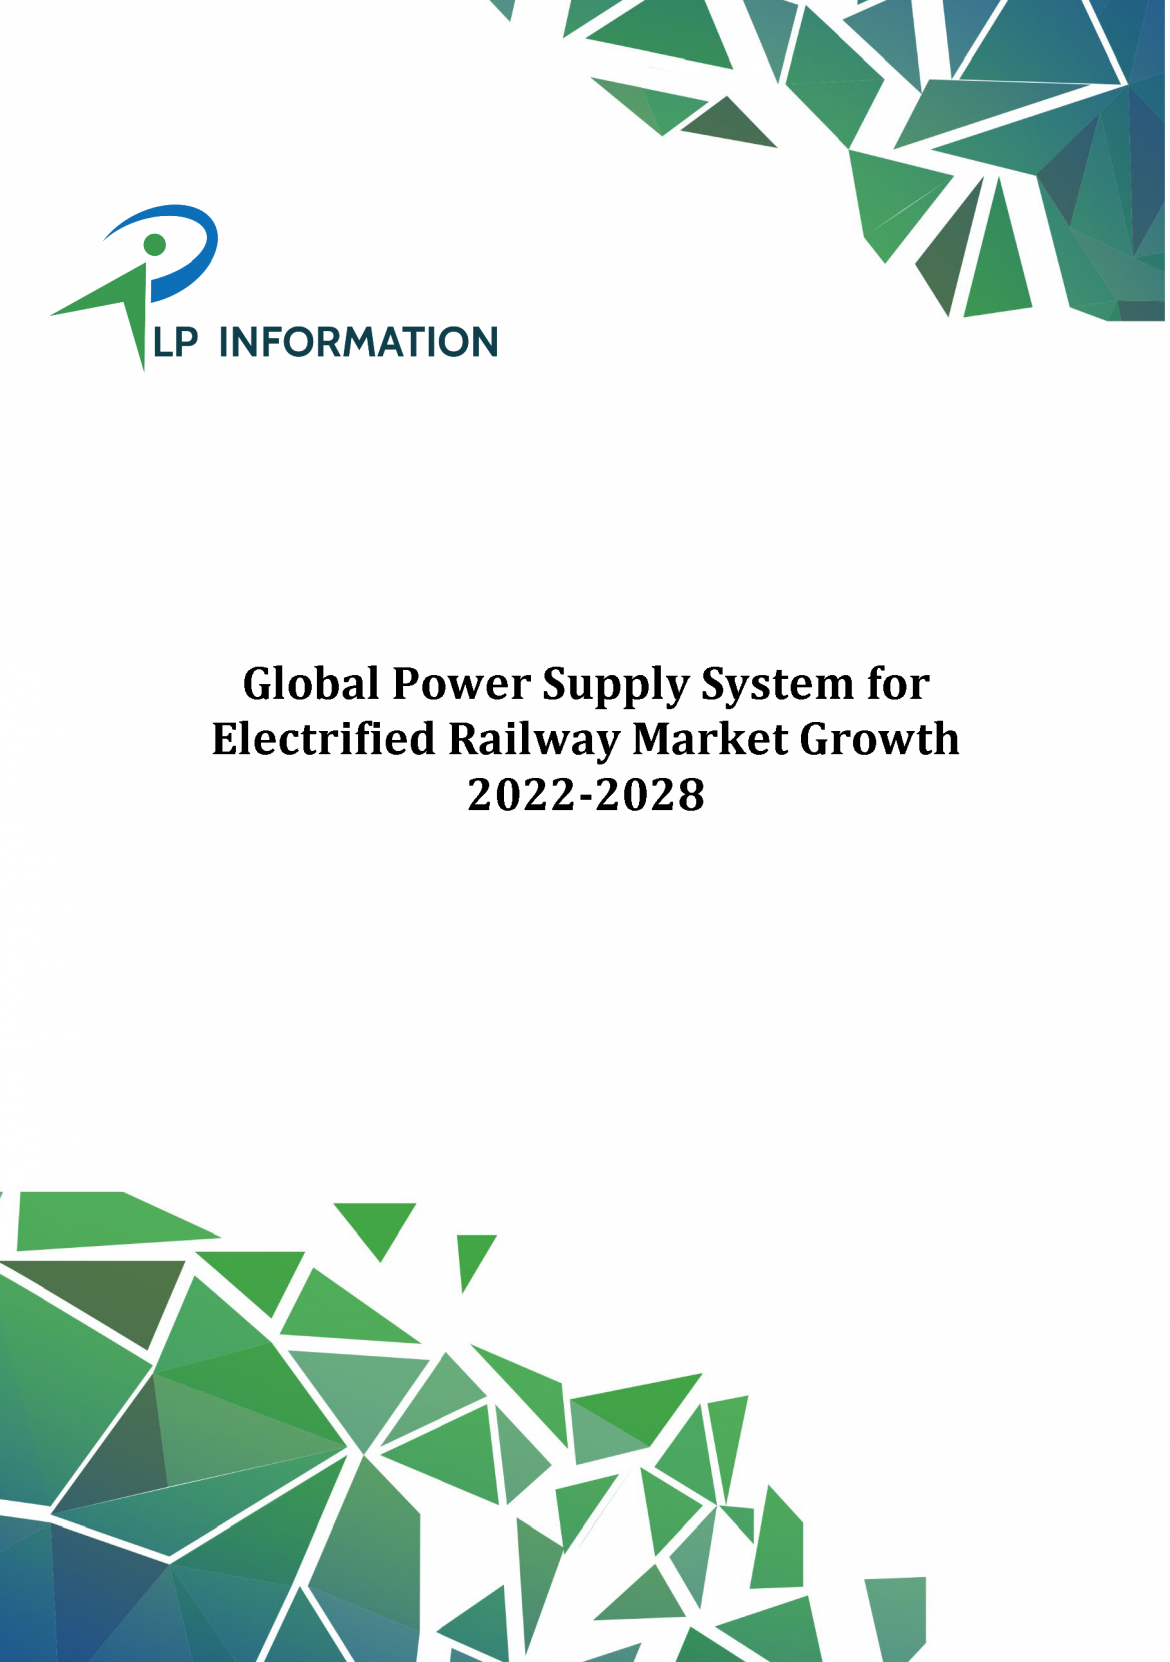 Global Power Supply System for Electrified Railway Market Growth 2022-2028